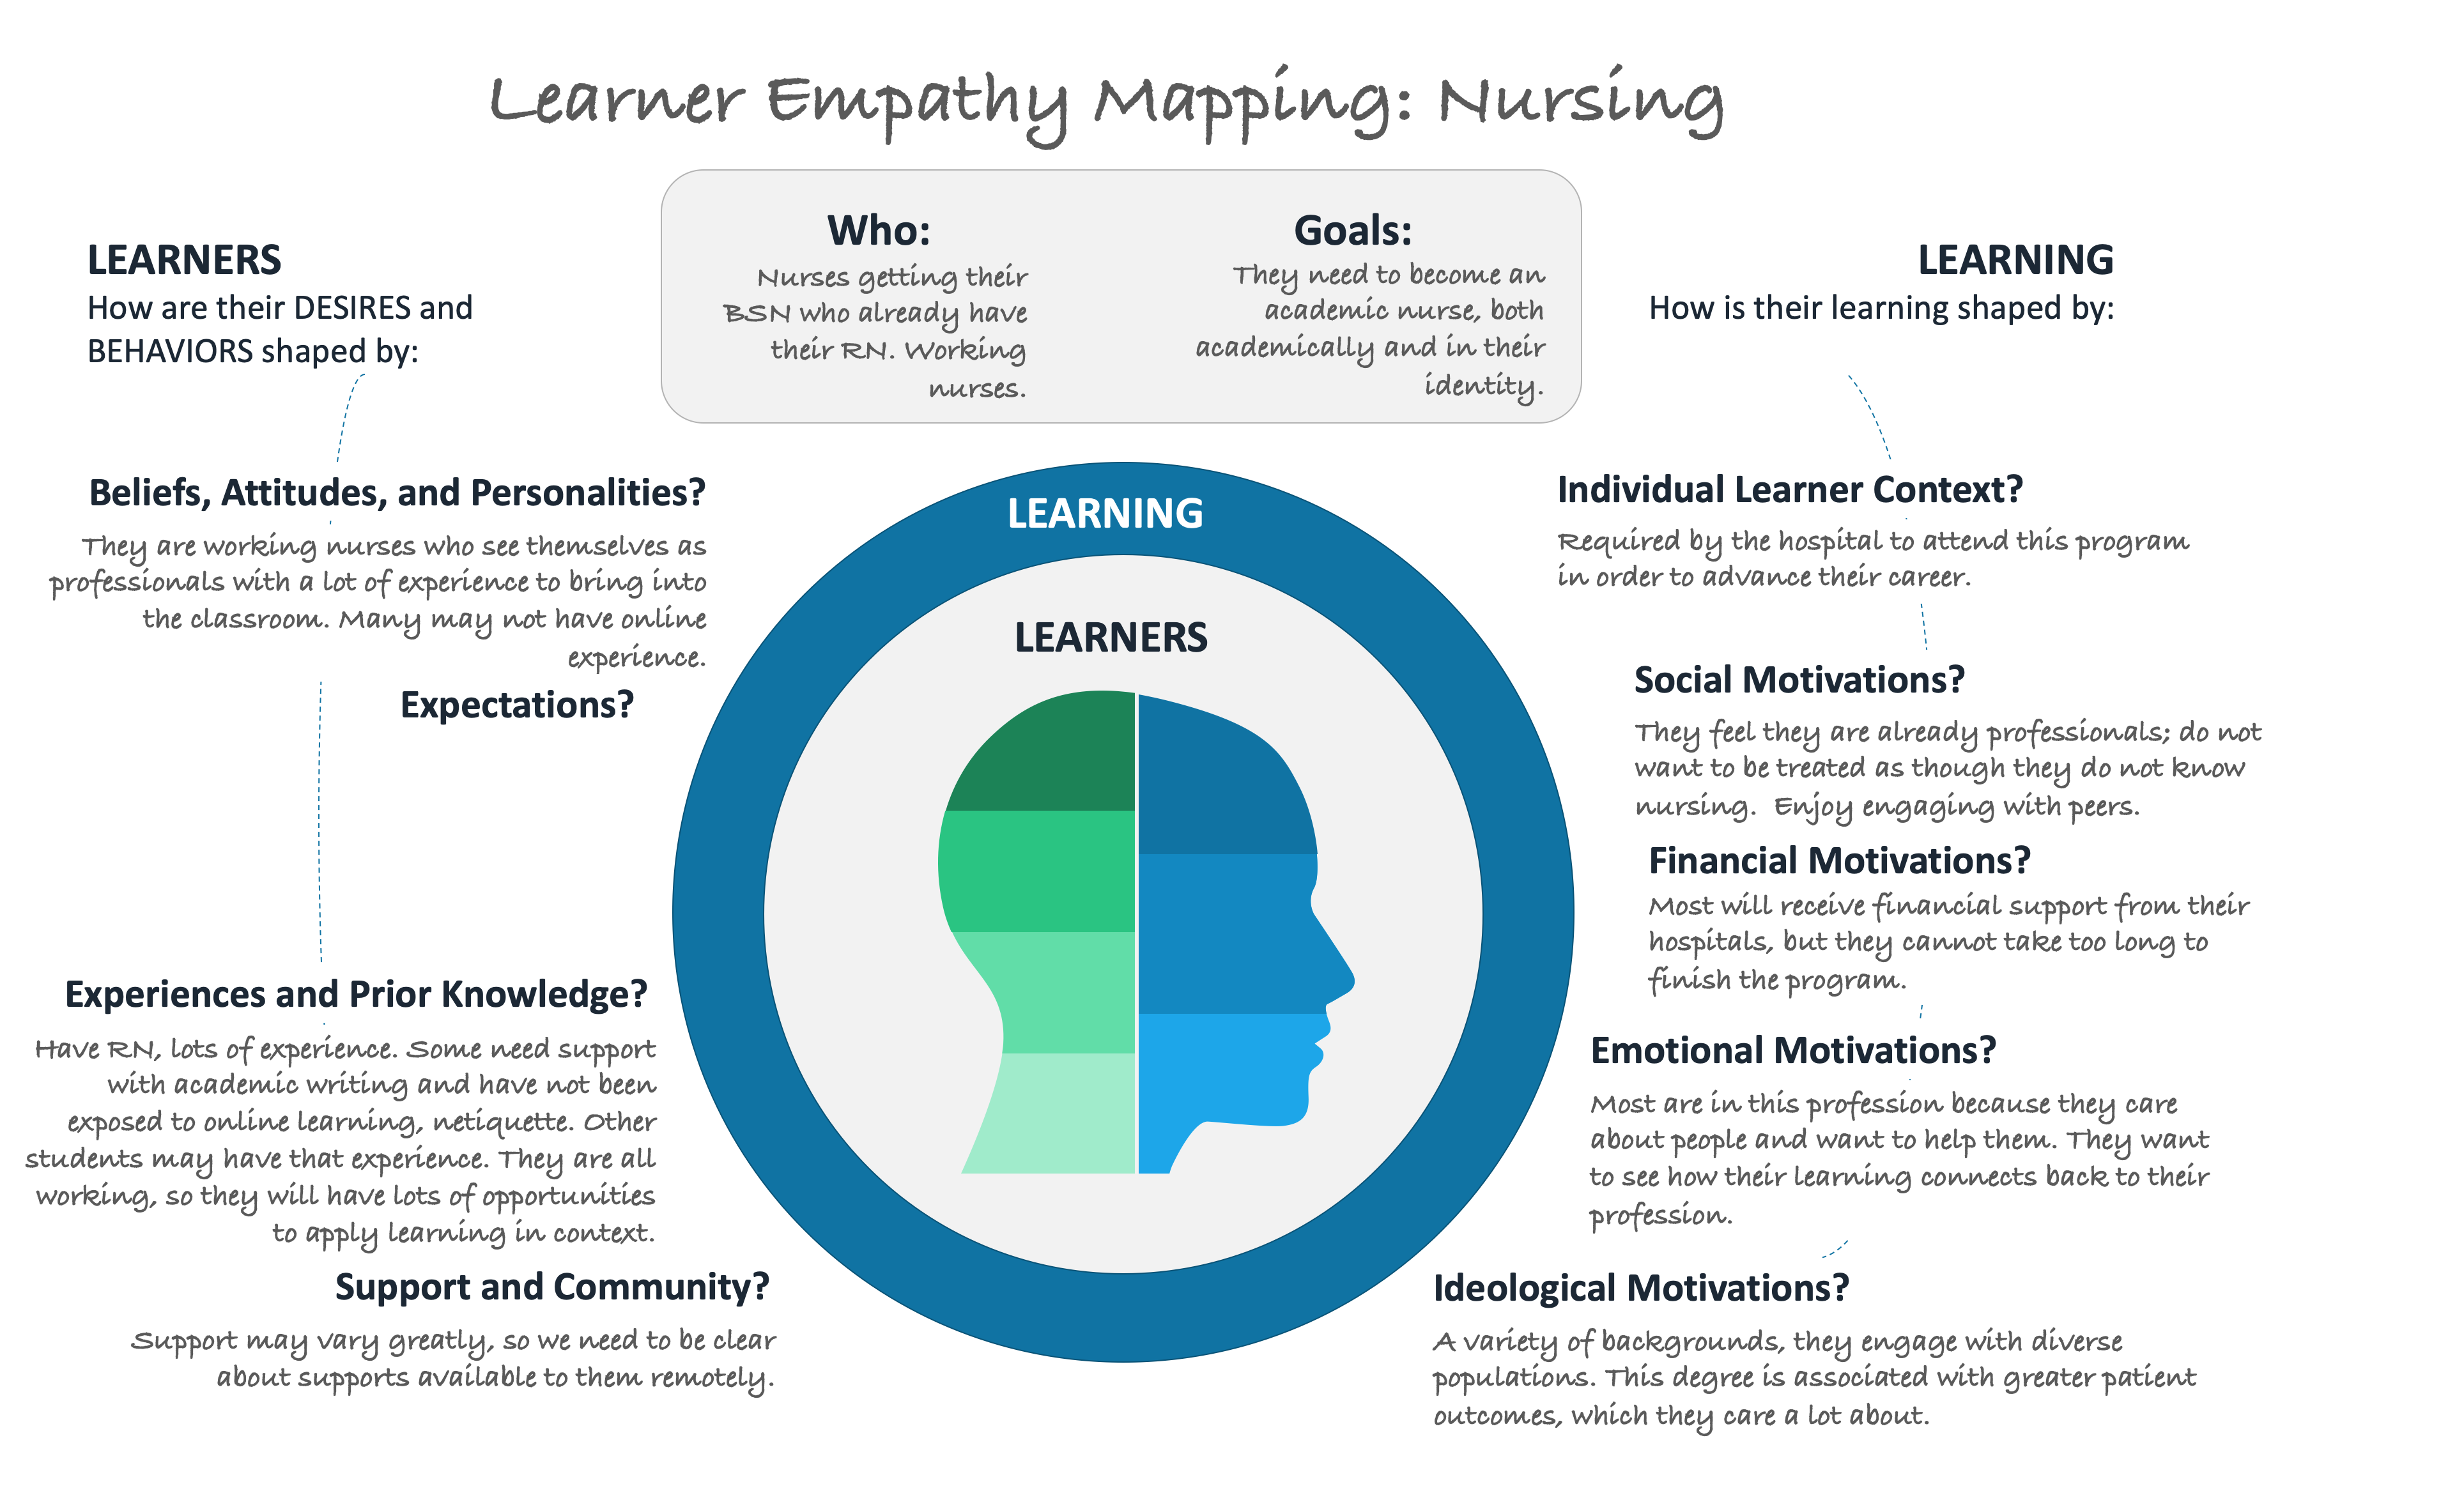 Image of an example of Learning Empathy Mapping for Nursing